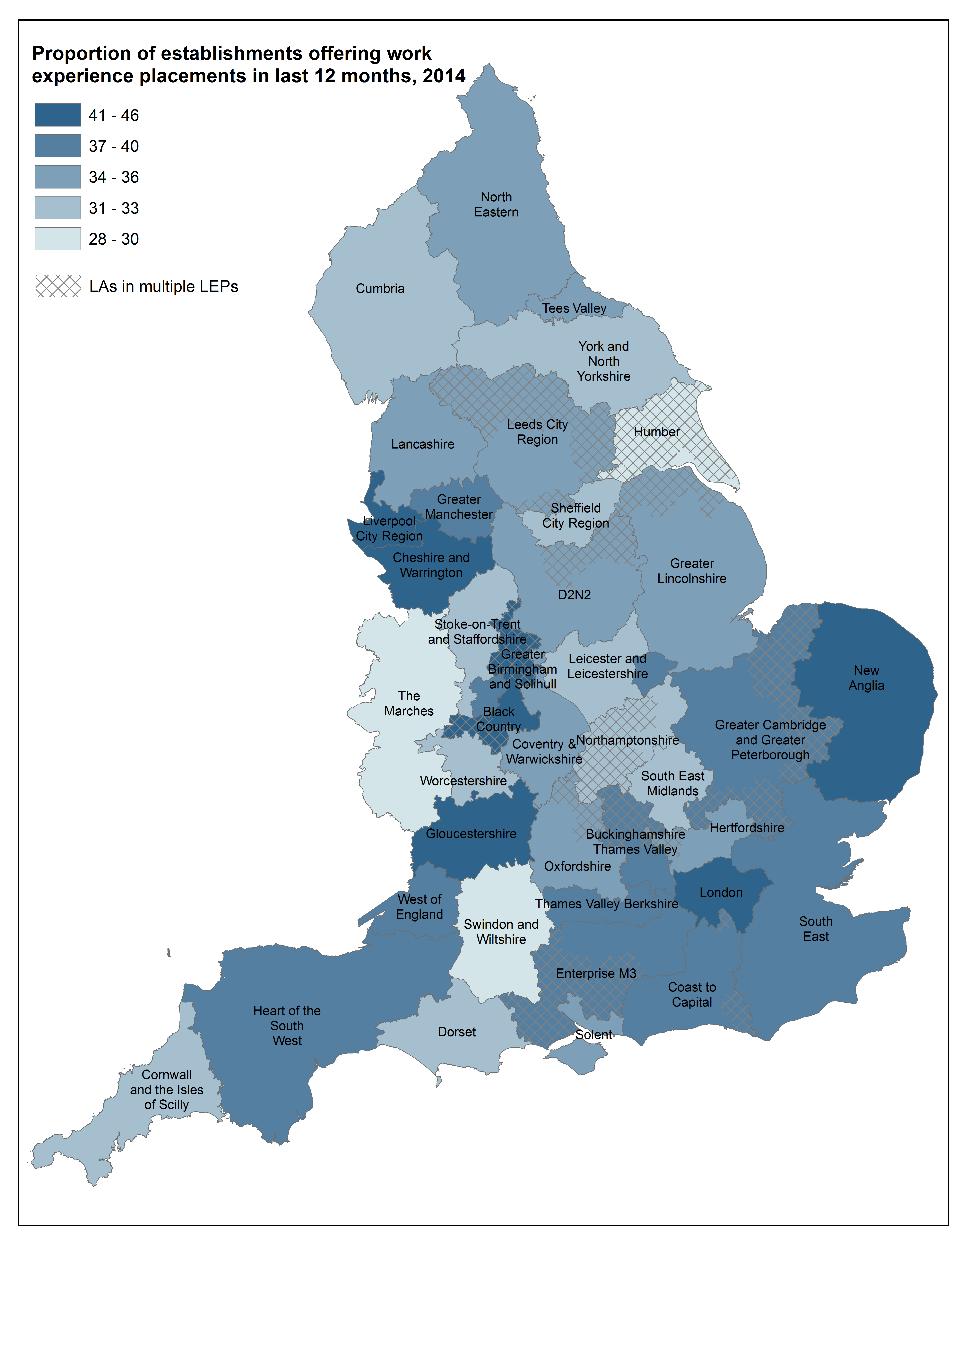 Work experience by region Liverpool has a high proportion of employers offering work placements despite having relatively high unemployment. In Humber only 29% of employers offer work experience.